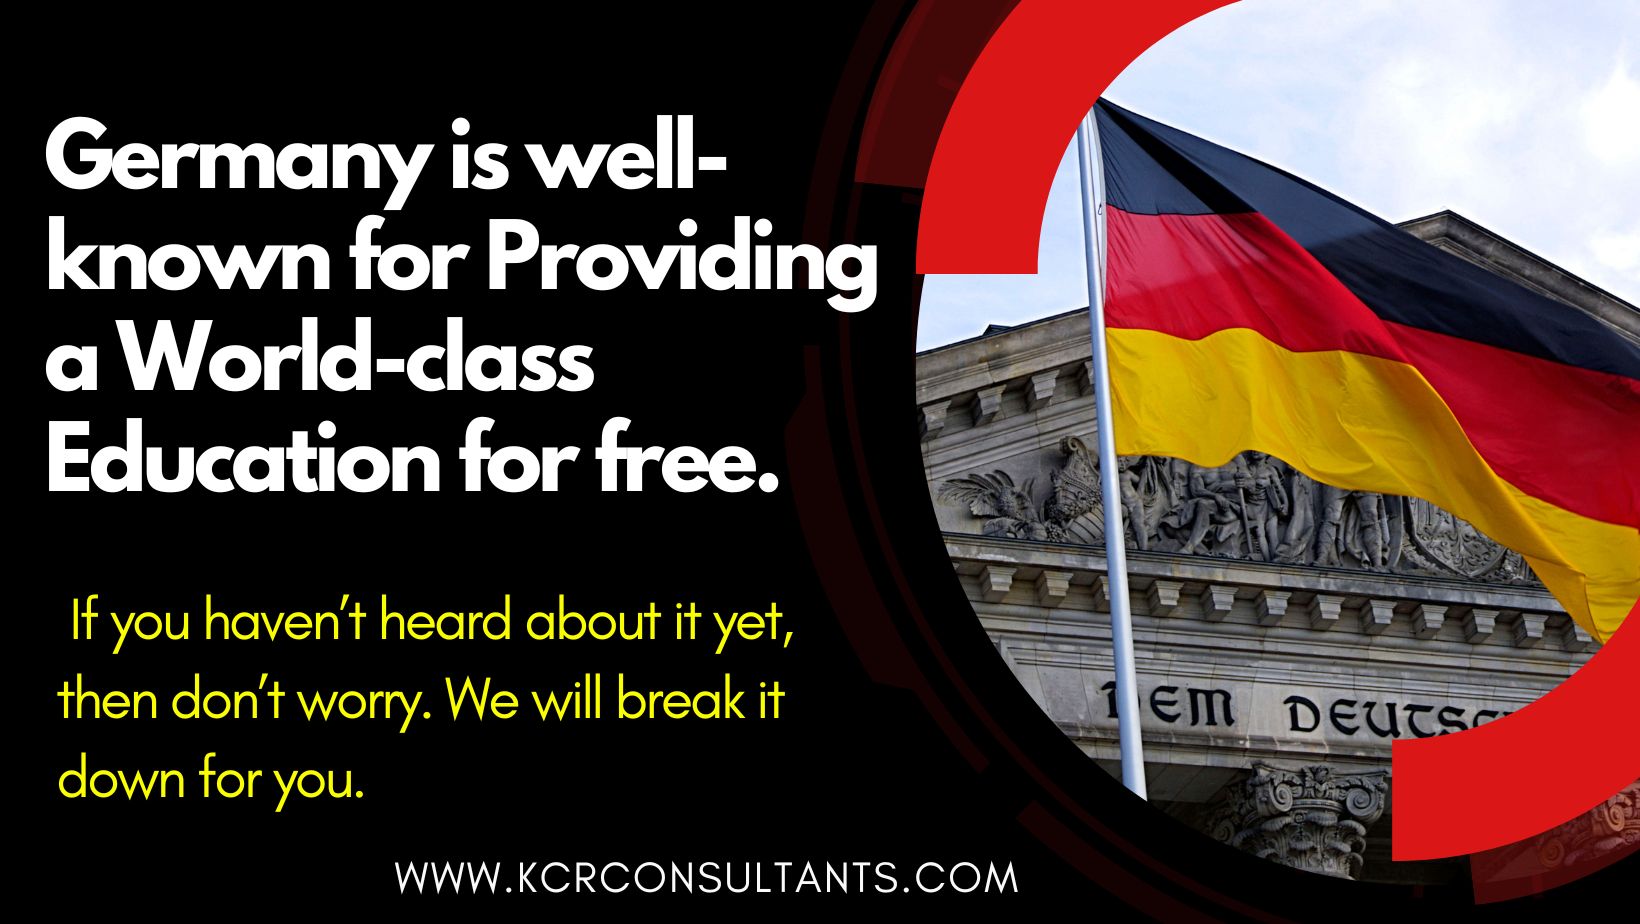 Germany is well-known for Providing a World-class Education for free.-kcr consultants